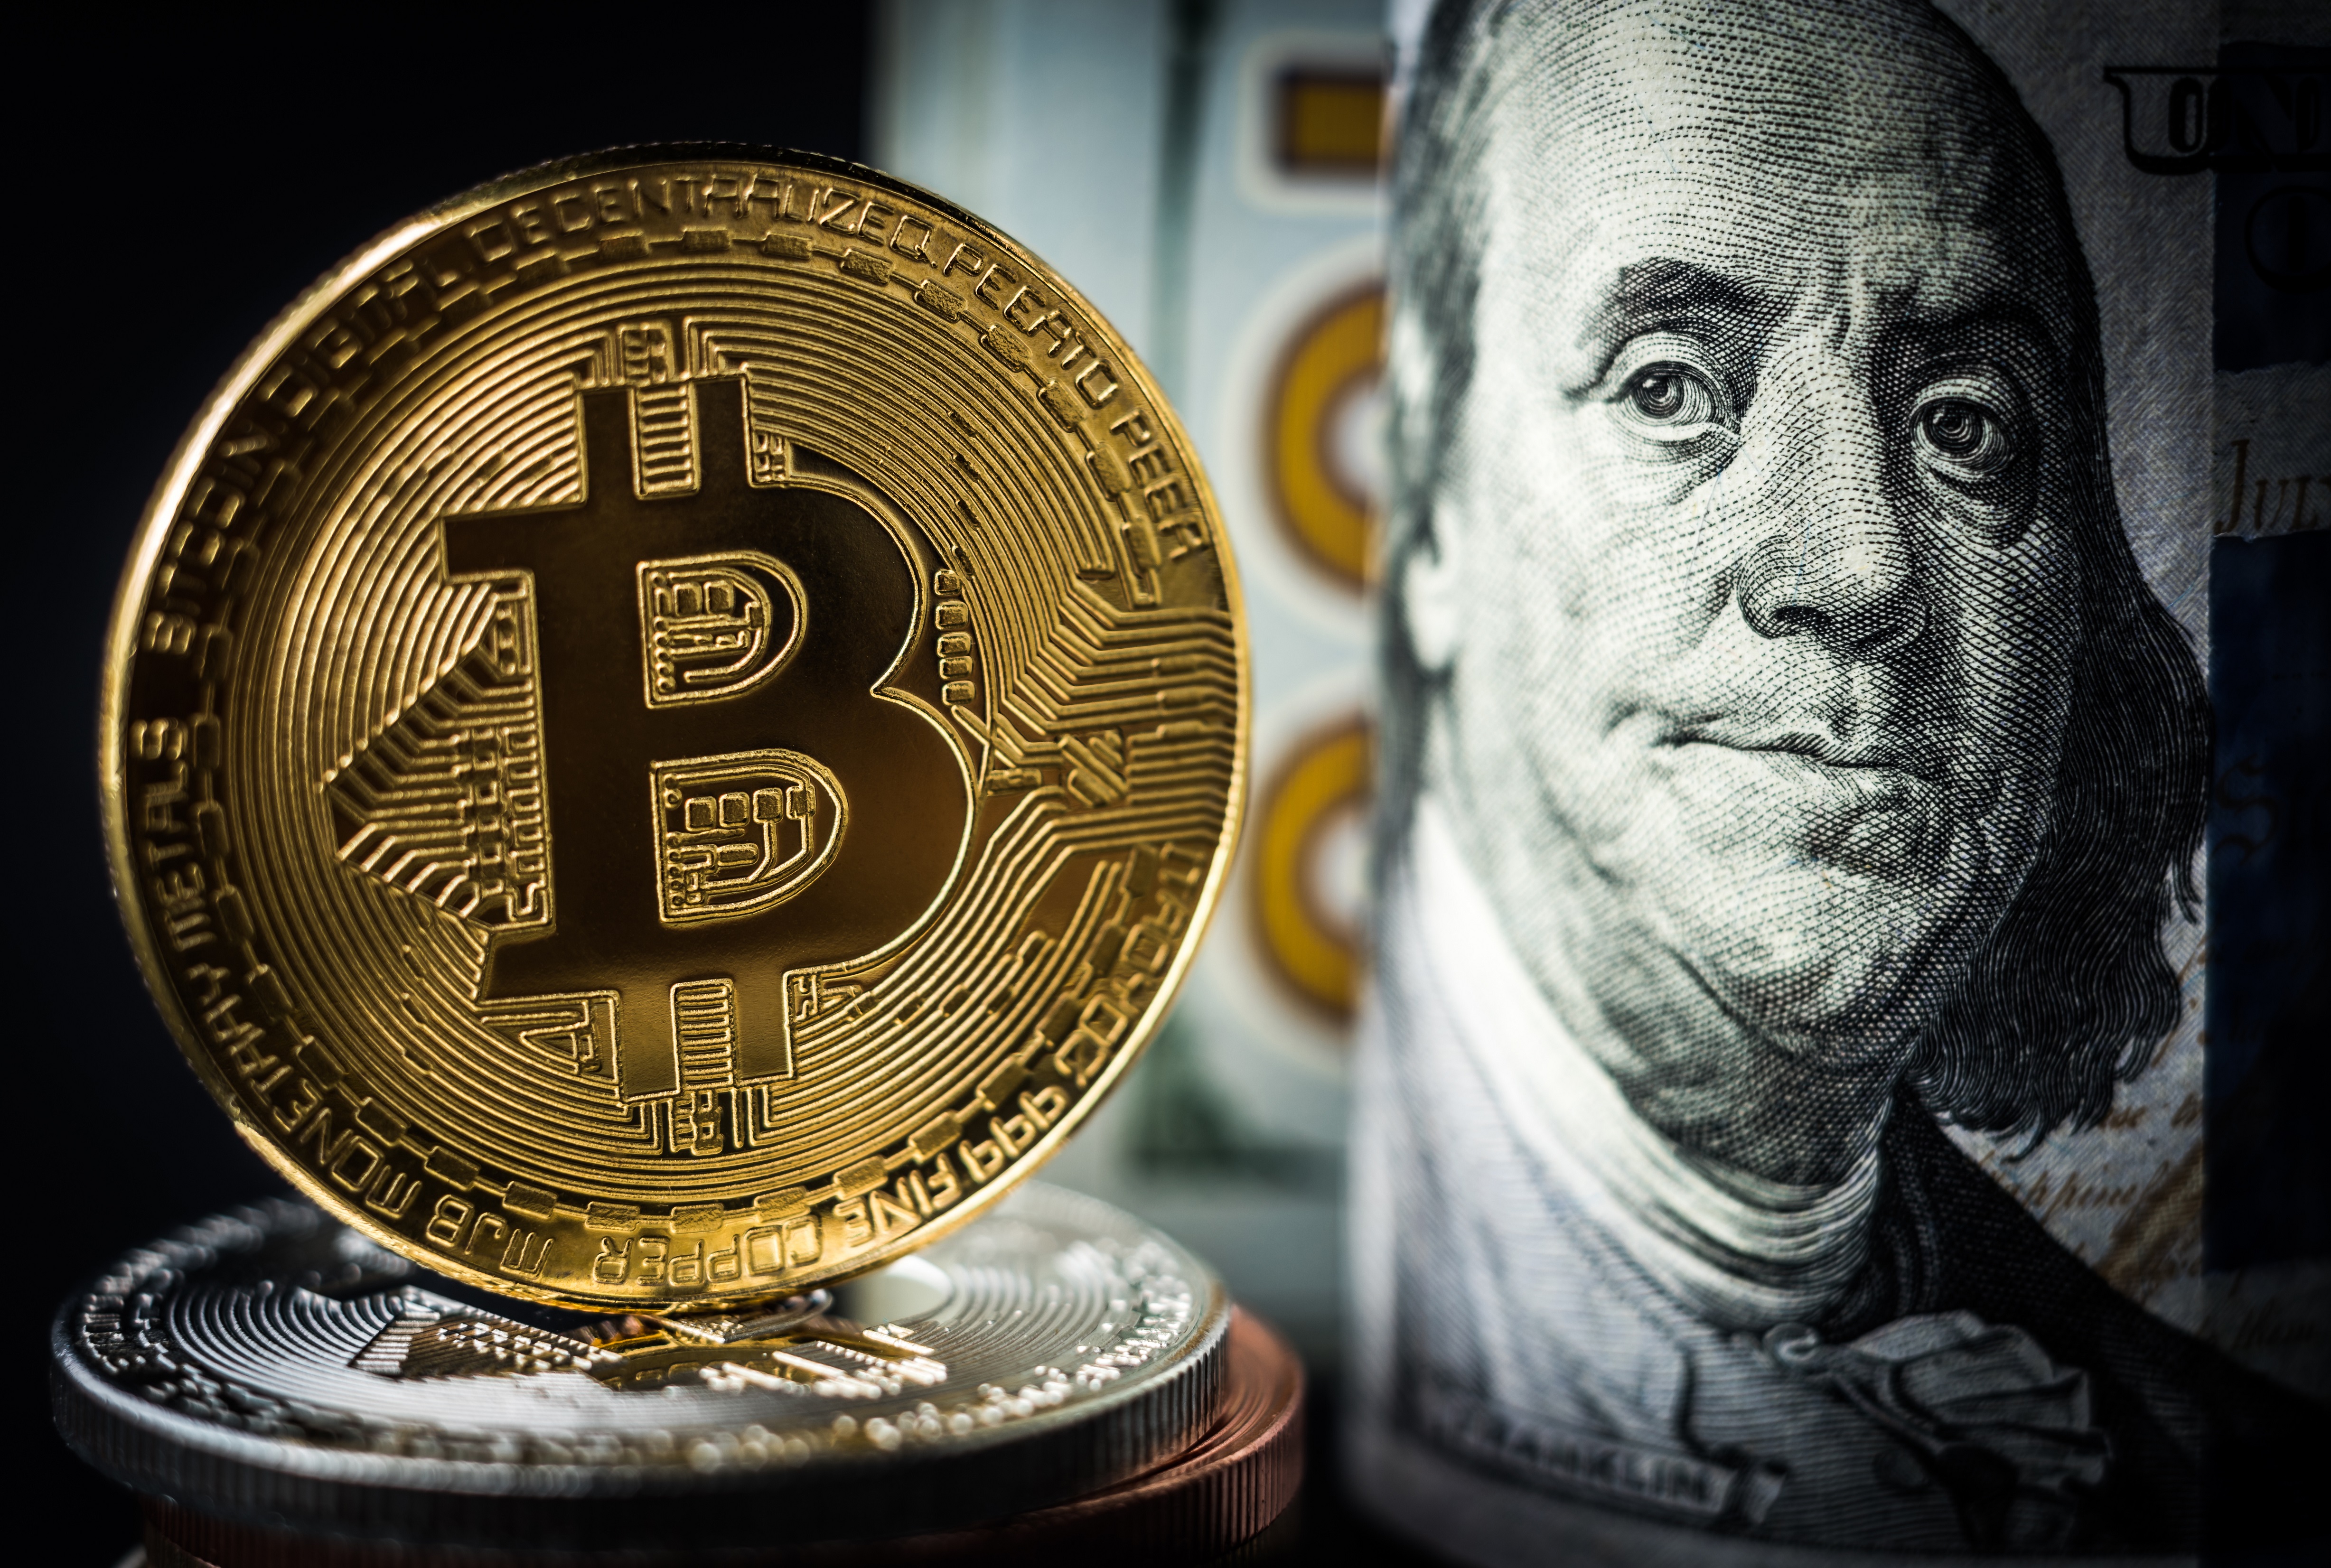 US Election & Weakening USD Will Fuel Bitcoin Price - deVere Group CEO